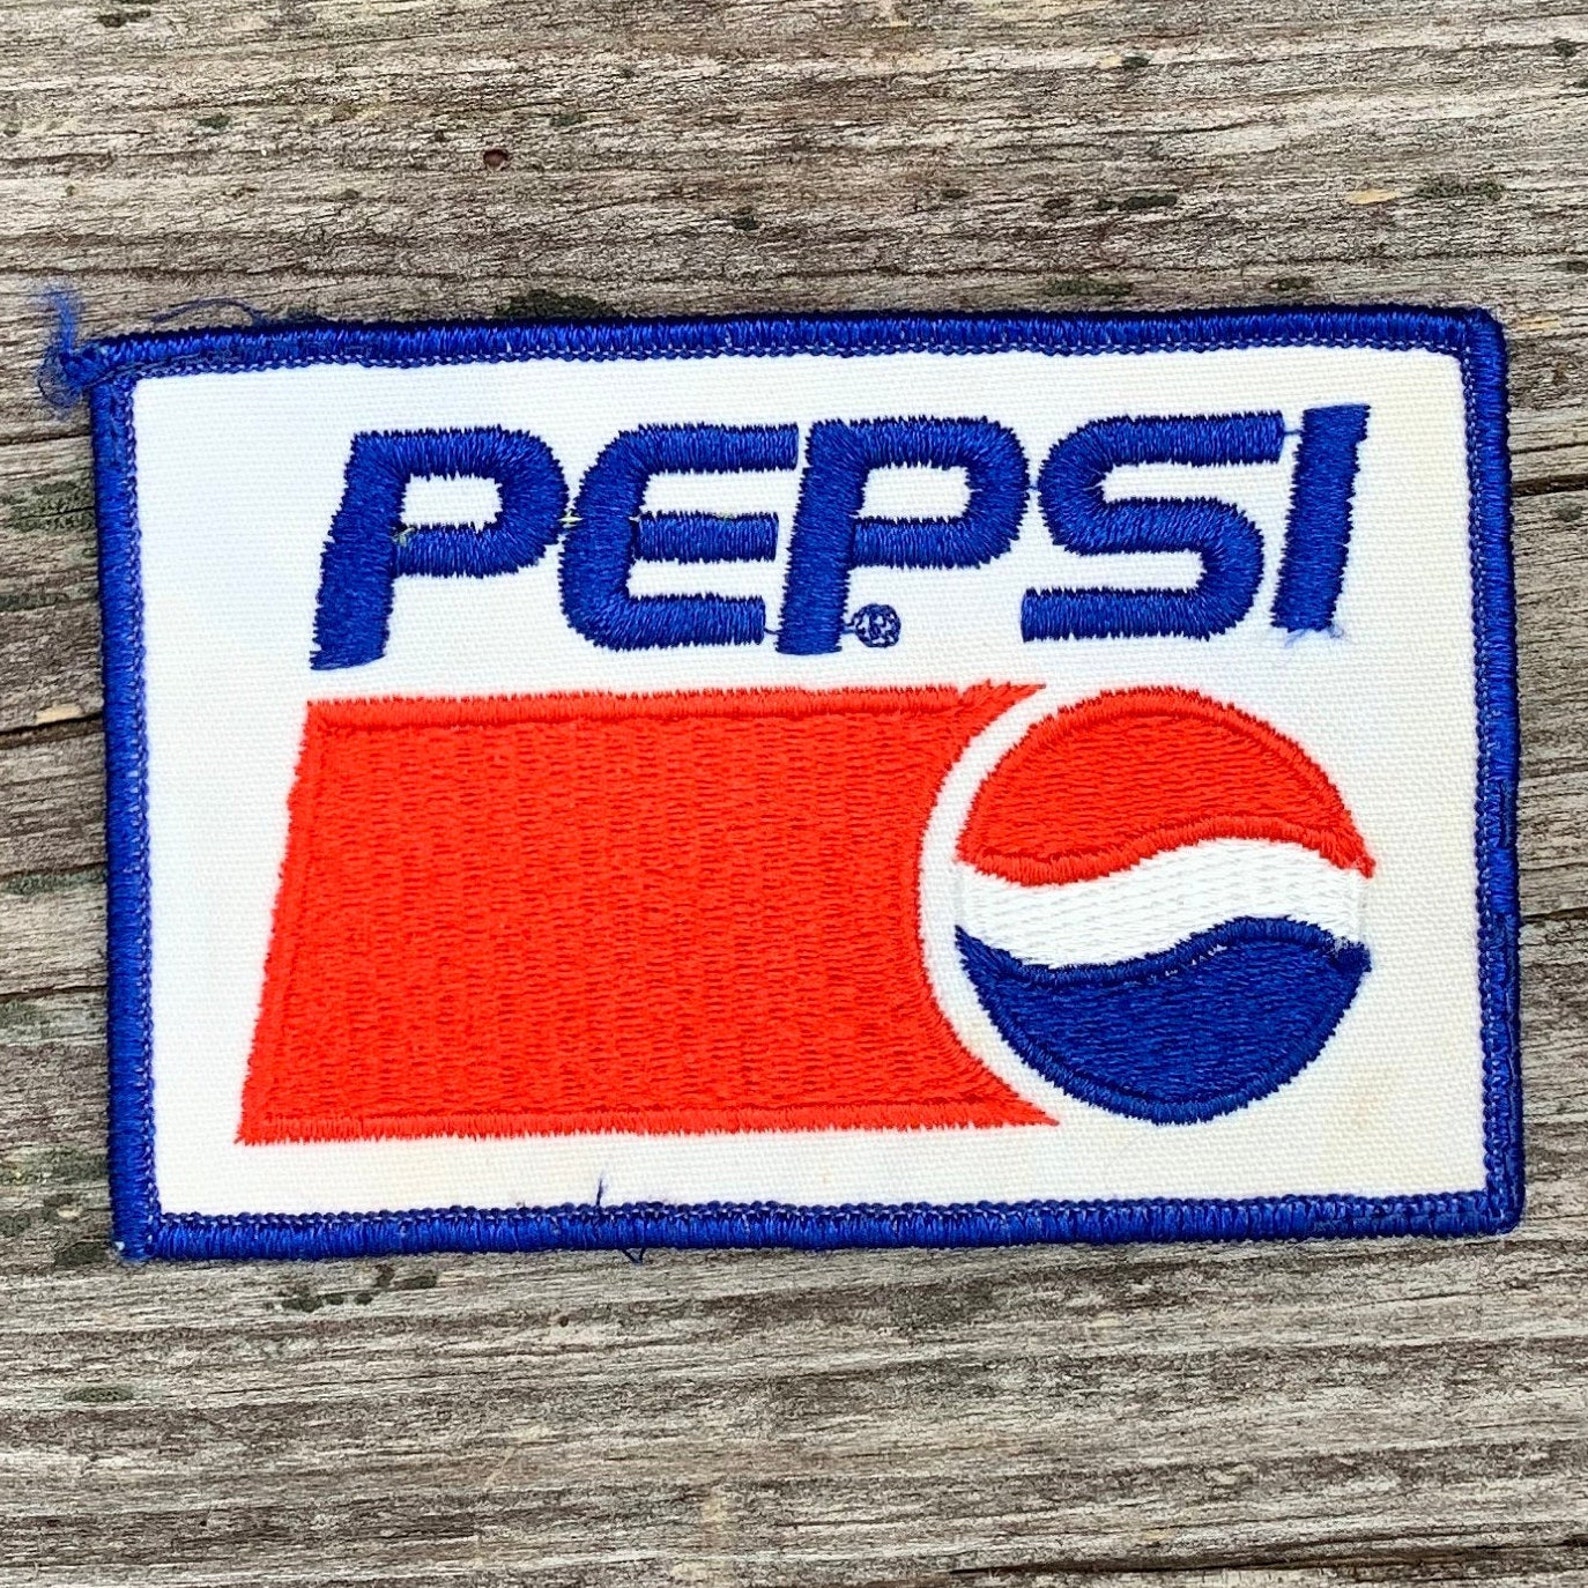 Pepsi. A work shirt uniform patch with the old Pepsi logo. | Etsy